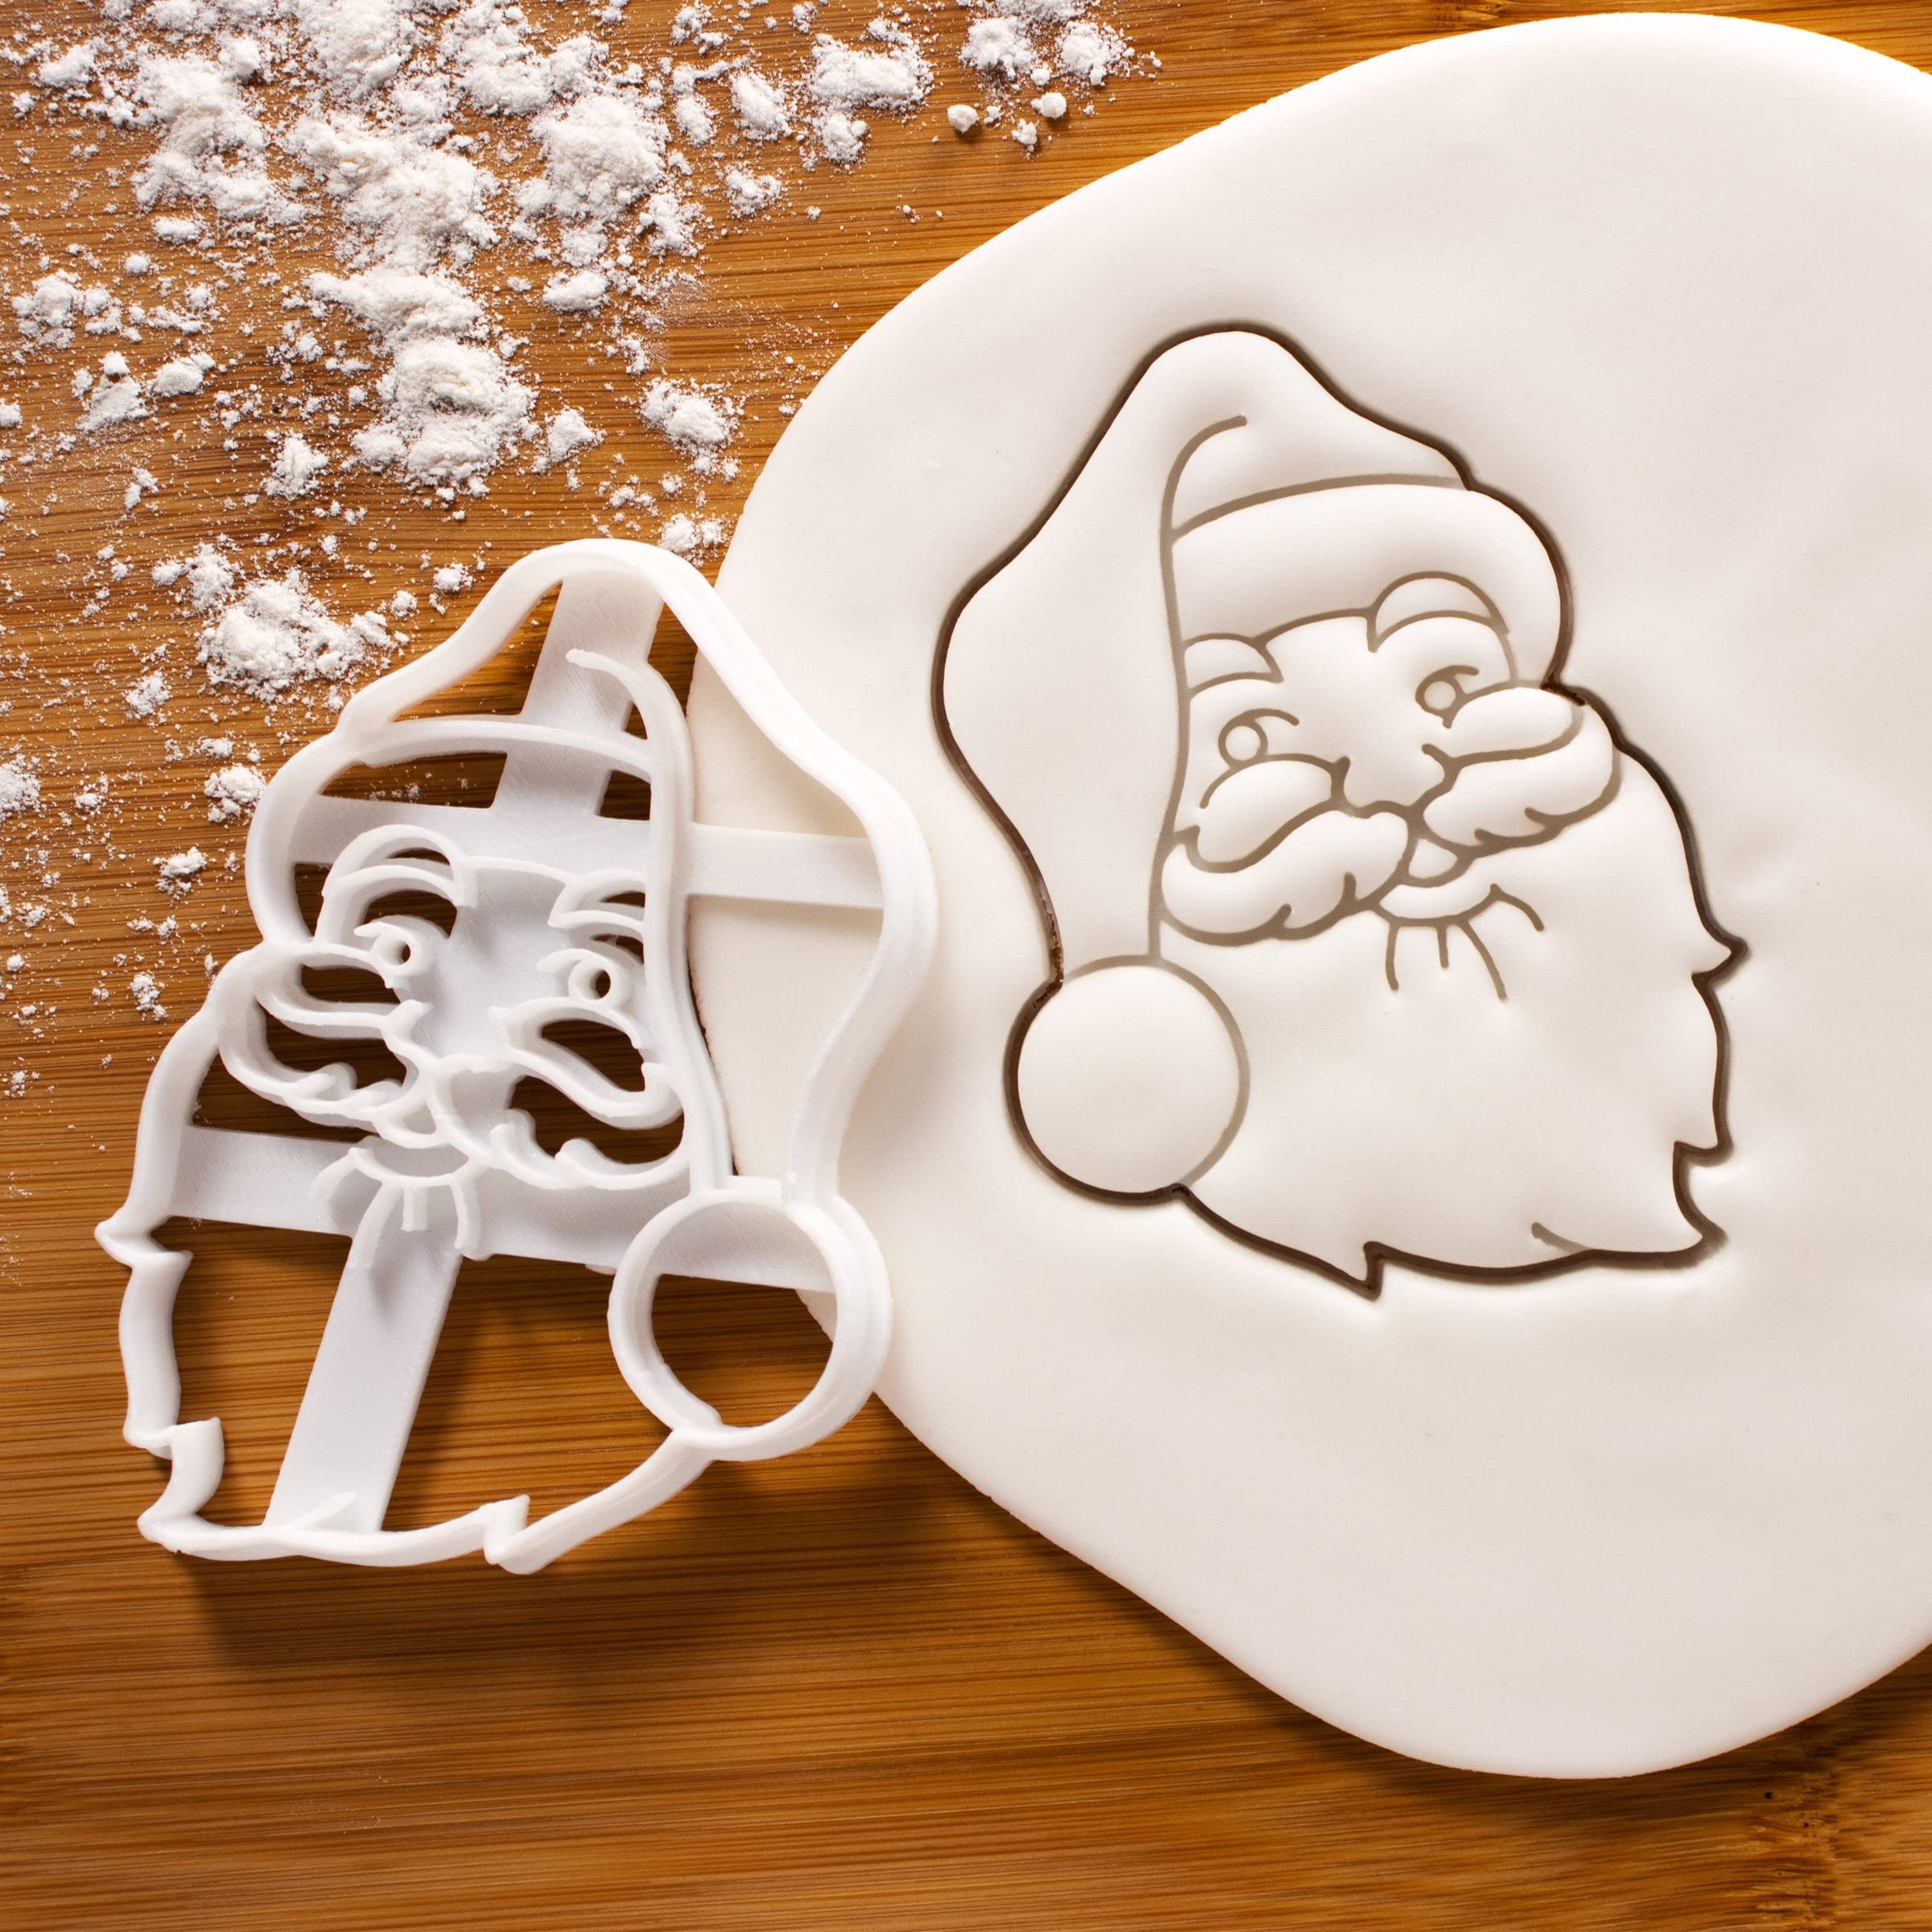 Set of 3 Christmas themed cookie cutters (Designs: Santa Claus, Snow Globe, and Snowman), 3 pieces - Bakerlogy